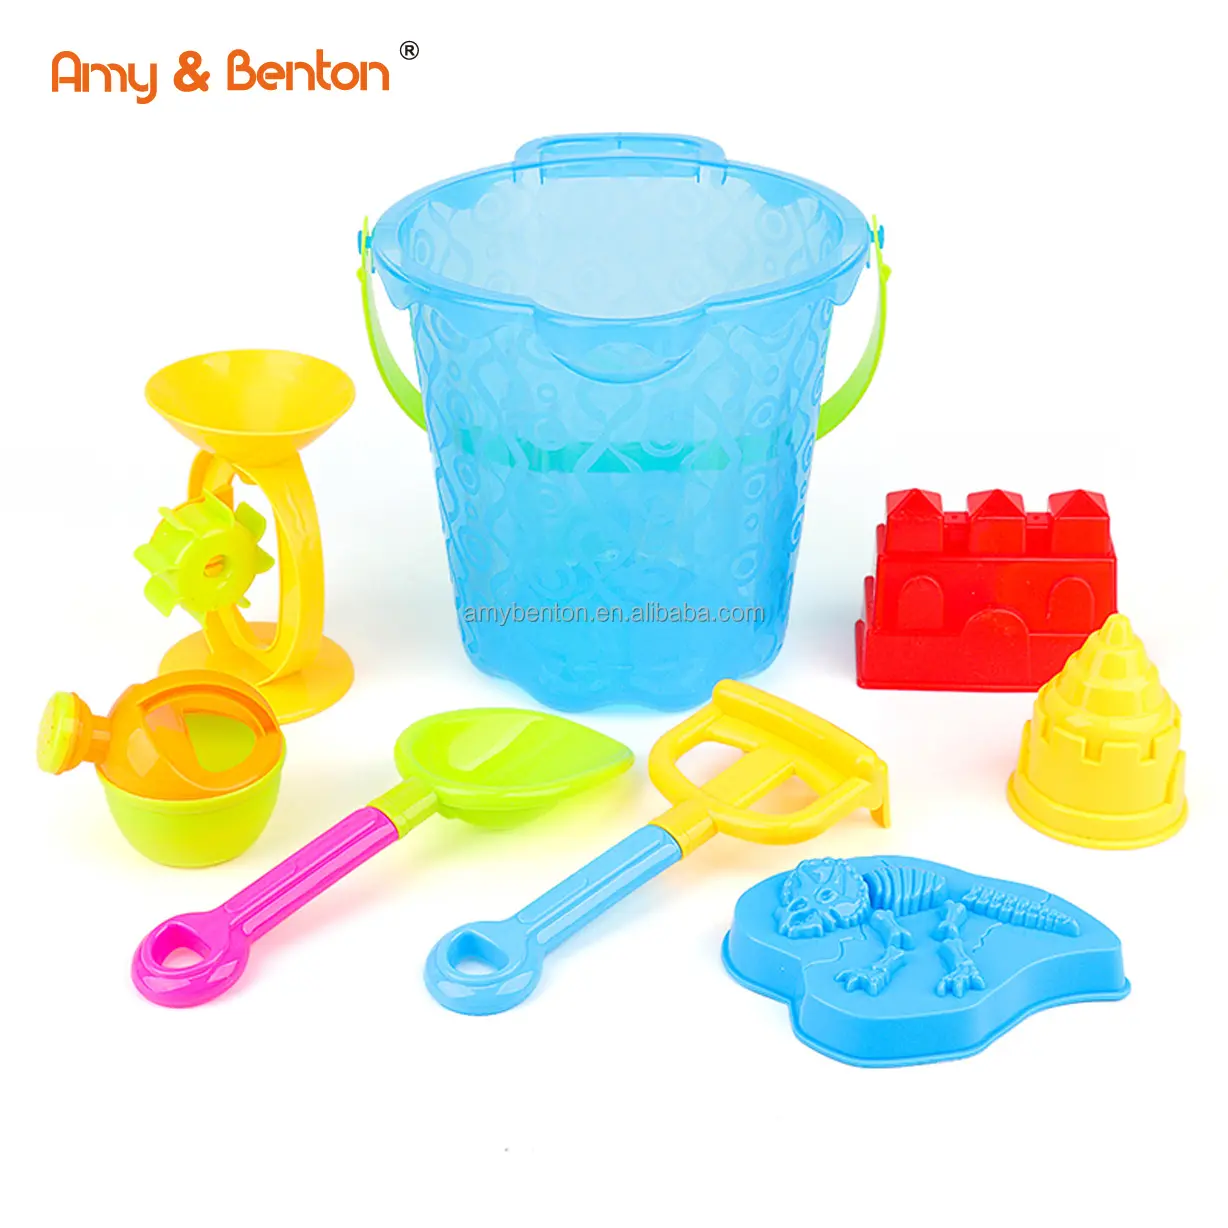 hot summer beach toys set sand toys tool kit beach buckets, shovels, rakes, molds for kids outdoor paly